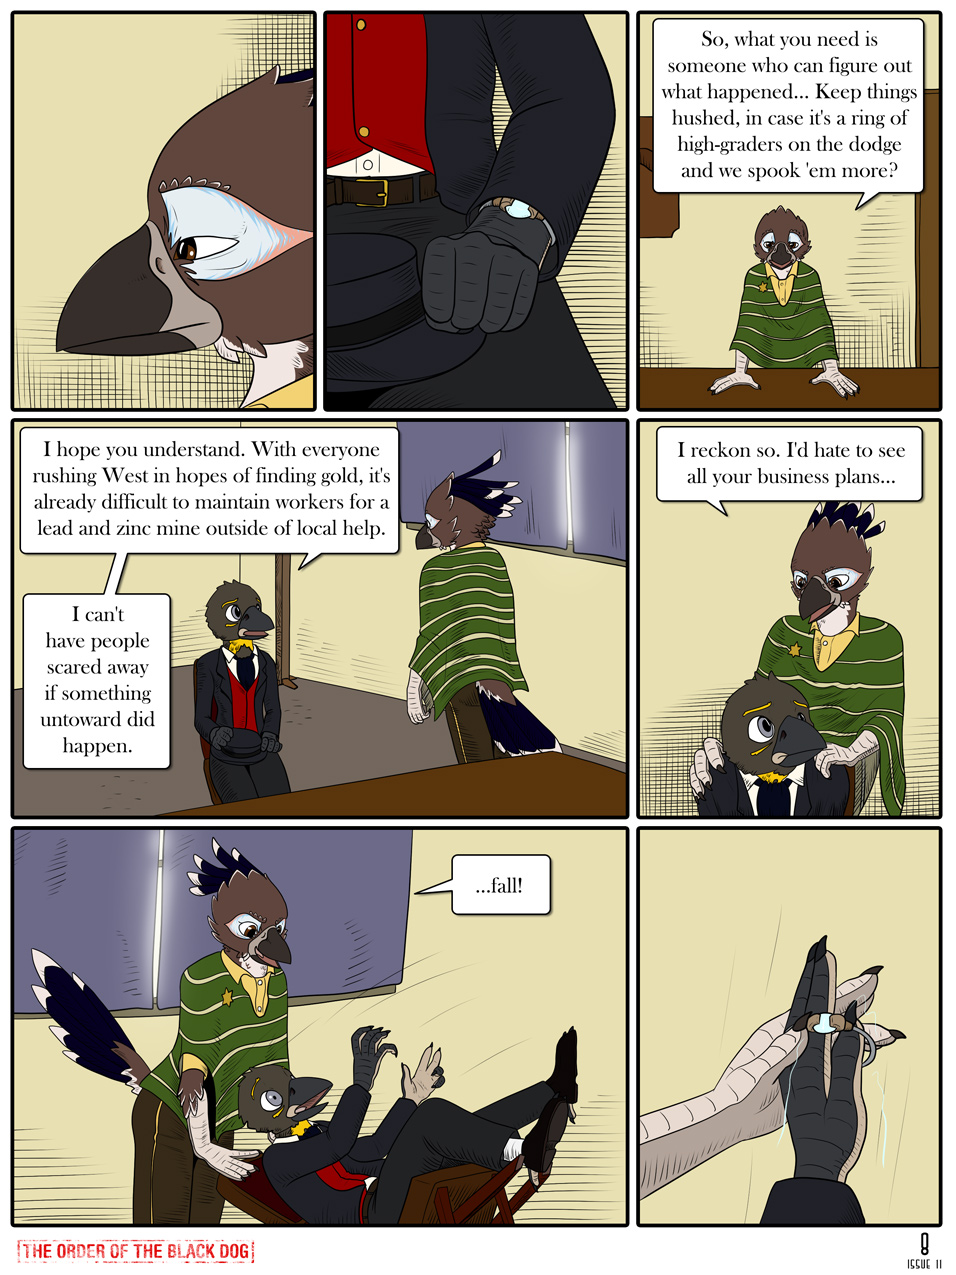 Issue 11, Page 8